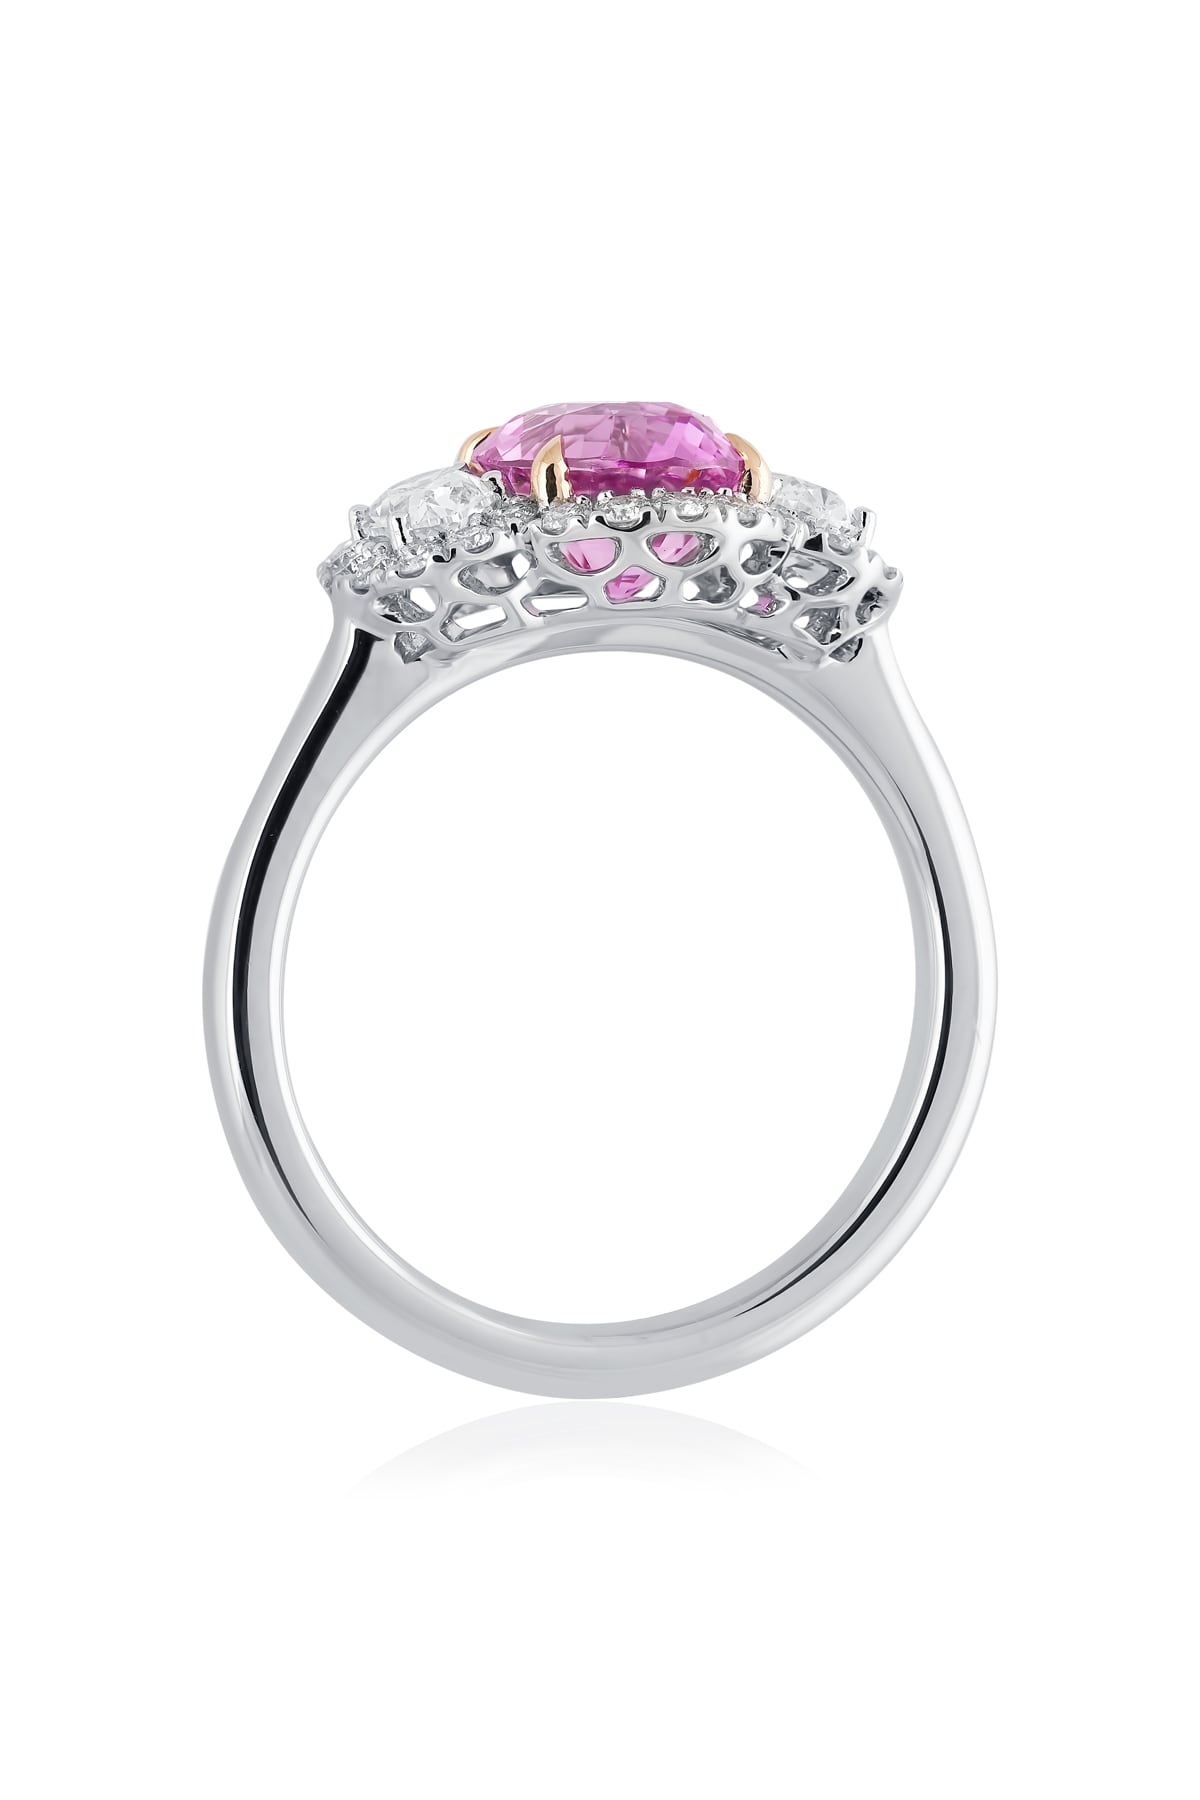 Natural Oval Pink Sapphire & Diamond Ring from LeGassick.